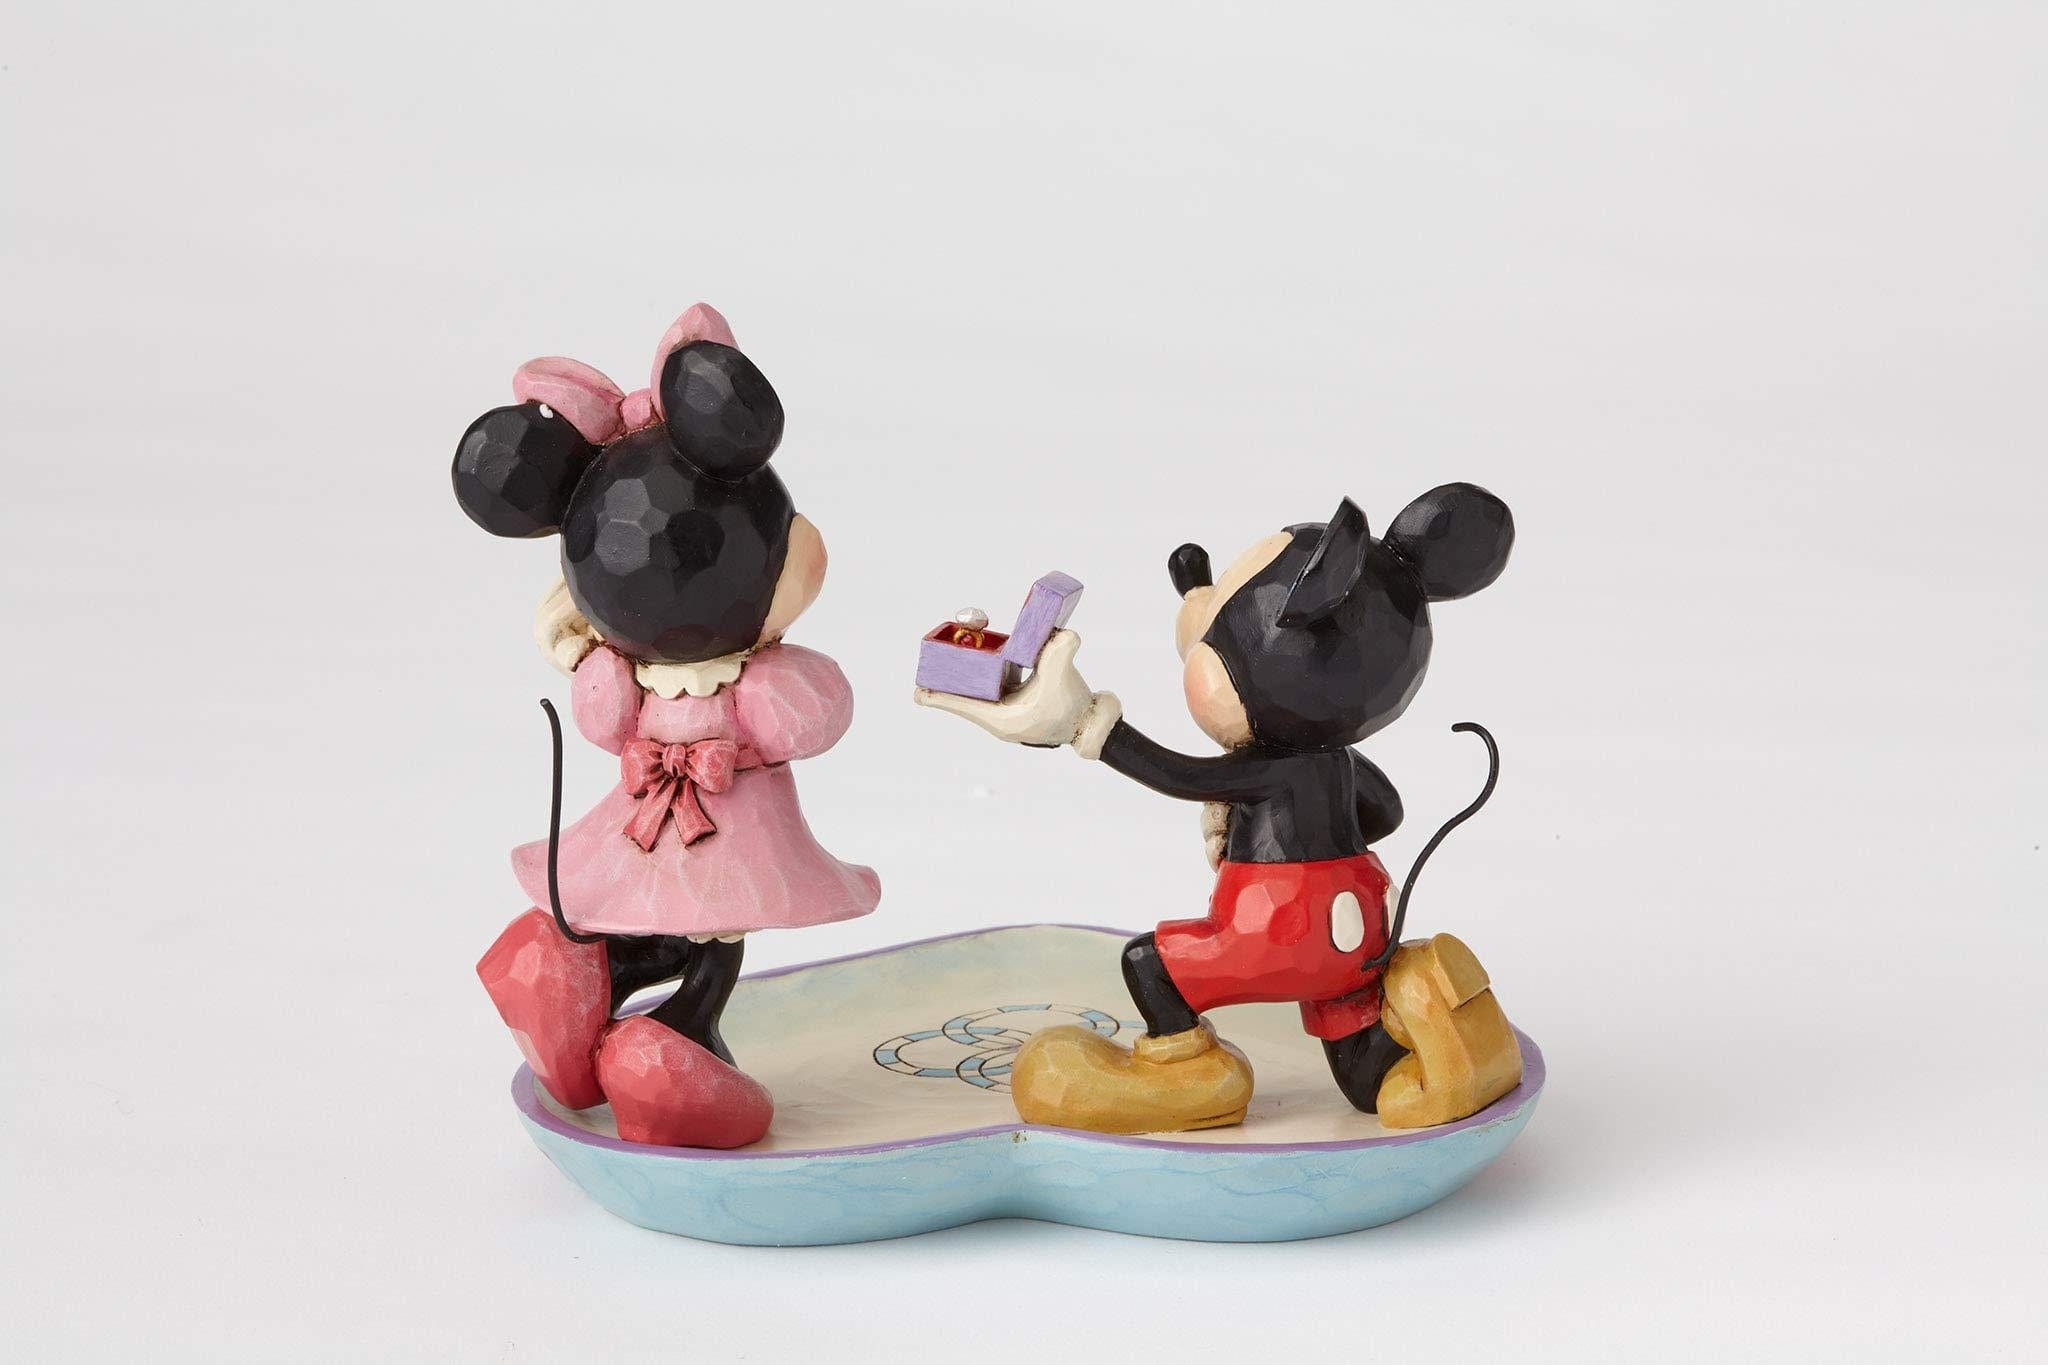 Enesco Disney Ornament Disney Traditions Figurine -  A Magical Moment (Mickey Proposing to Minnie)